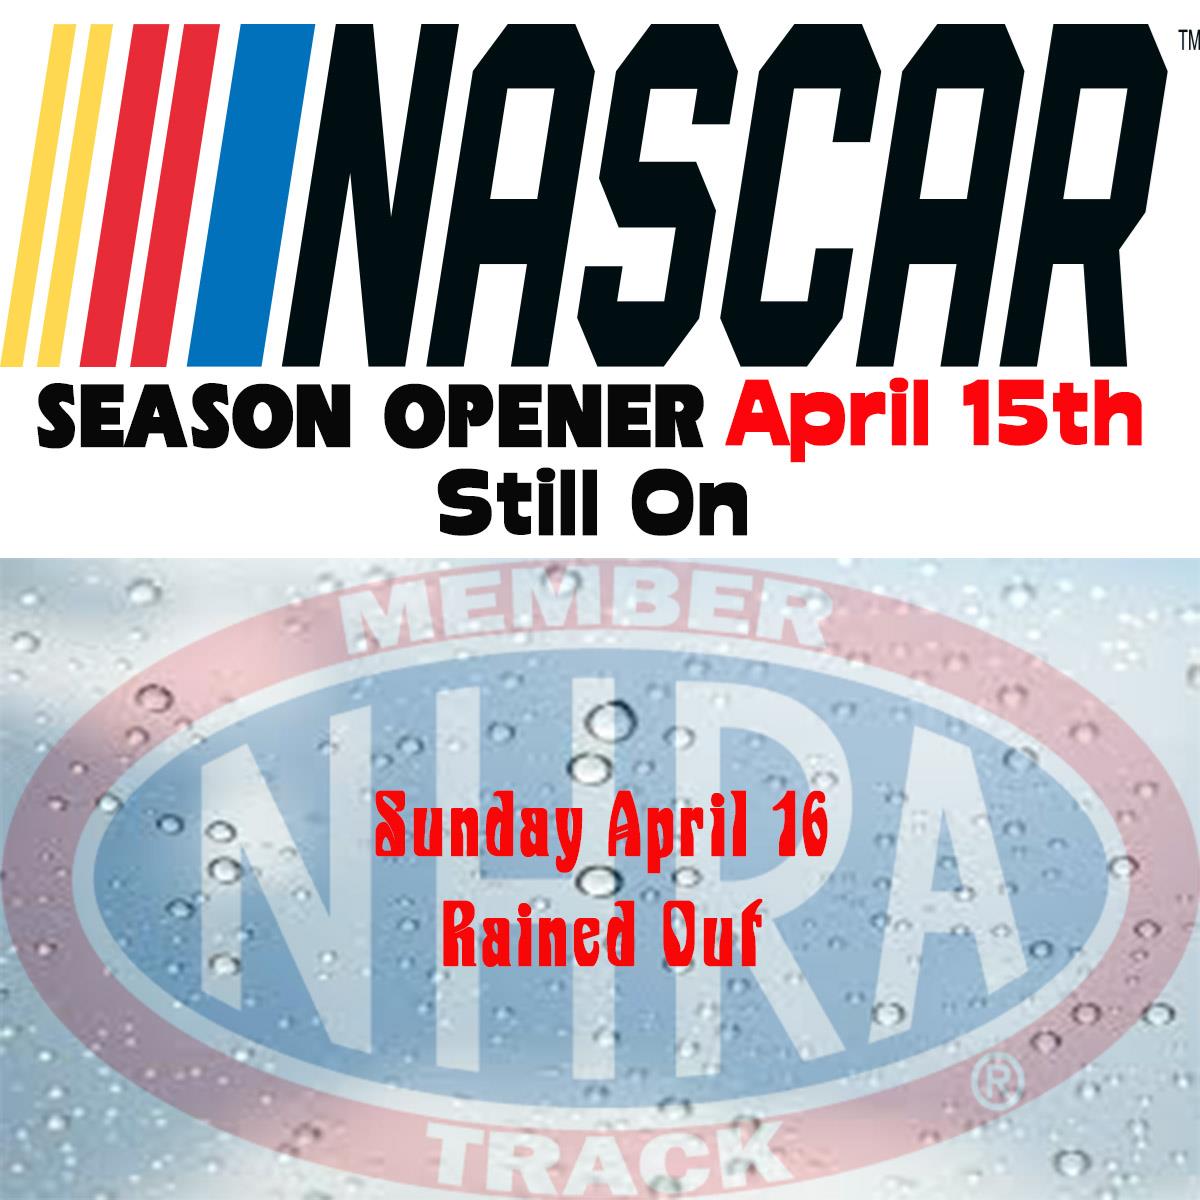 NASCAR Season Opener set for April 15 is a go but the NHRA Drags on Sunday, April 16 are rained out